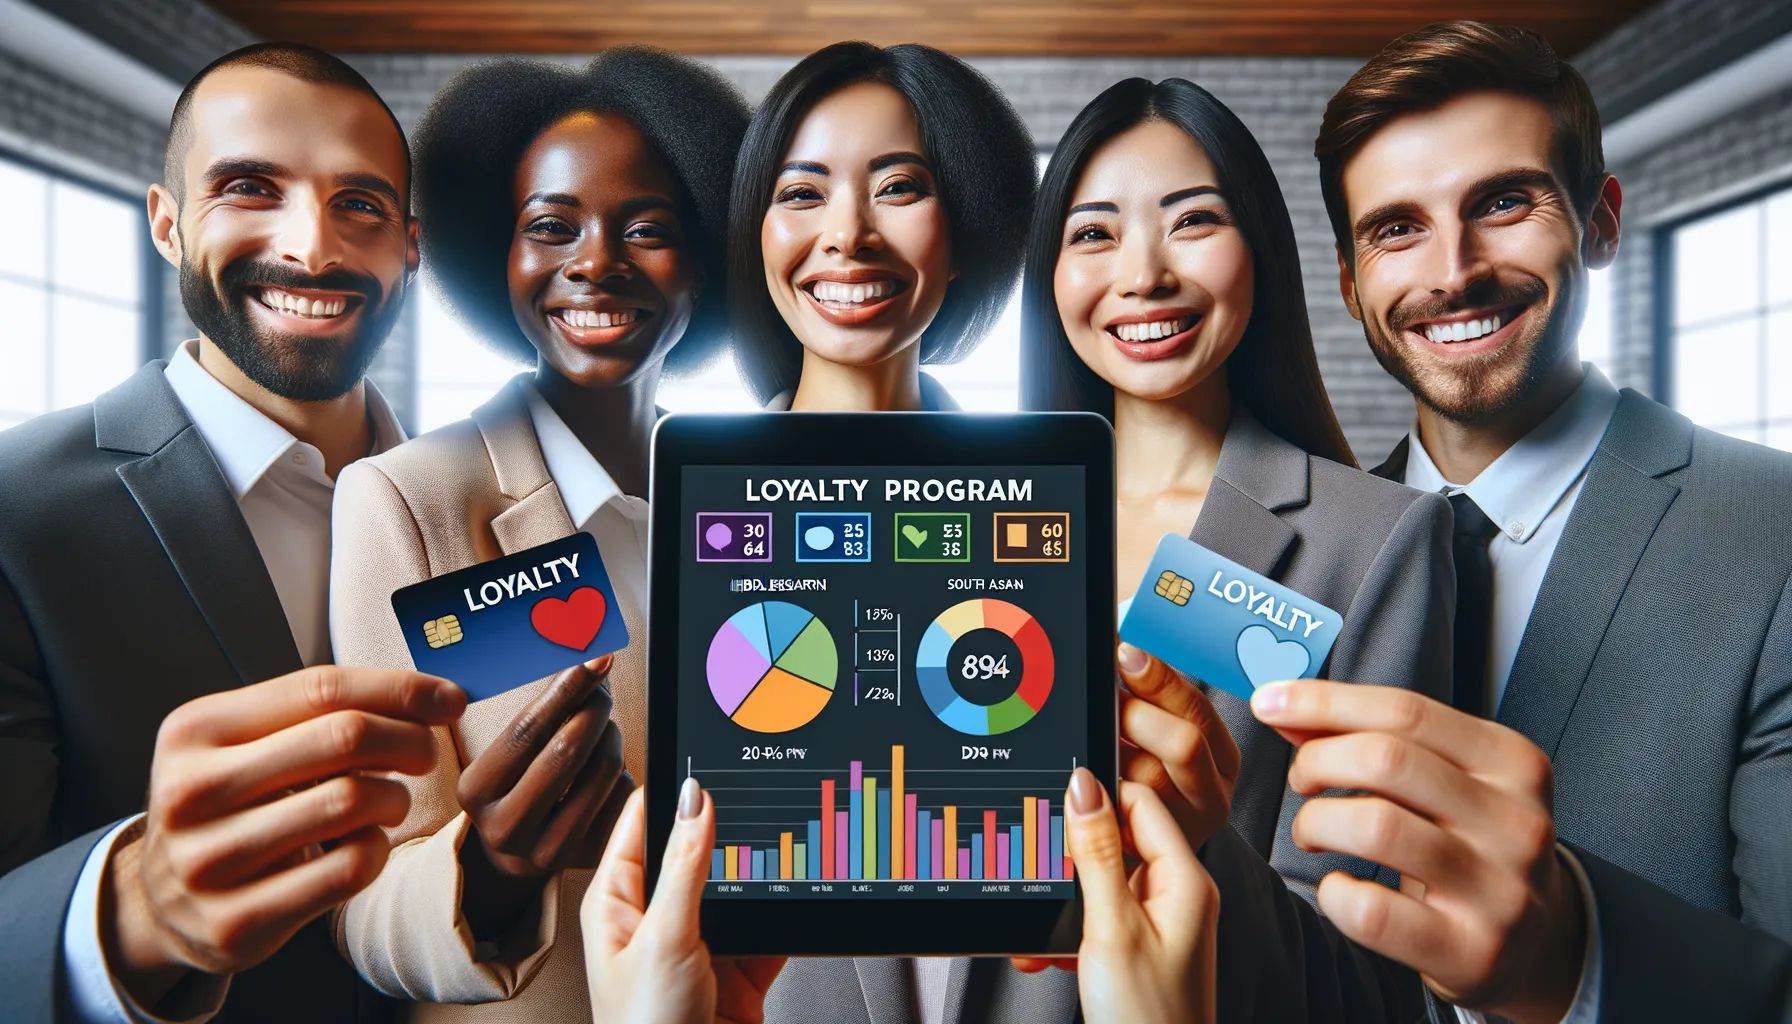 What Metrics to Track for Loyalty Program Engagement